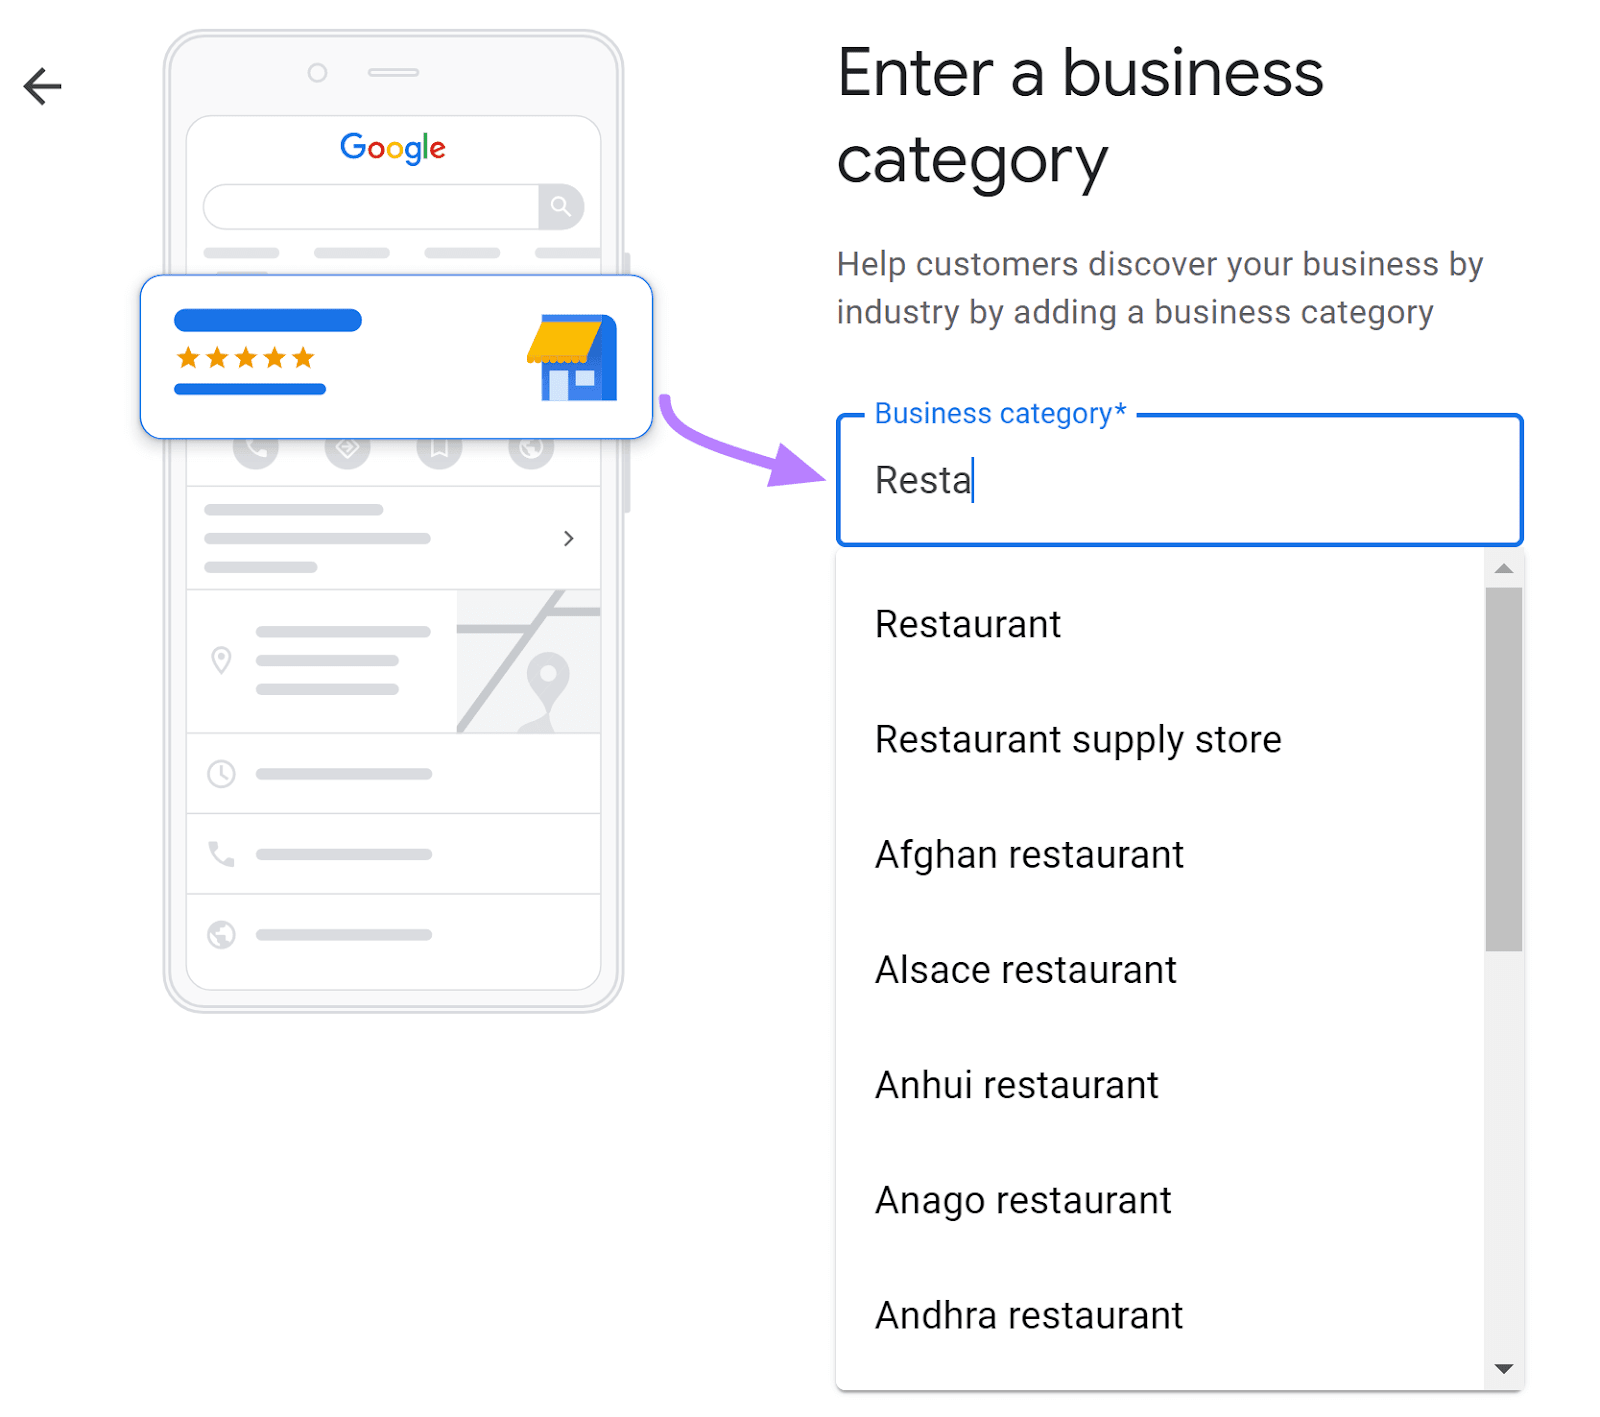 "Enter a business category" step of creating a GBP